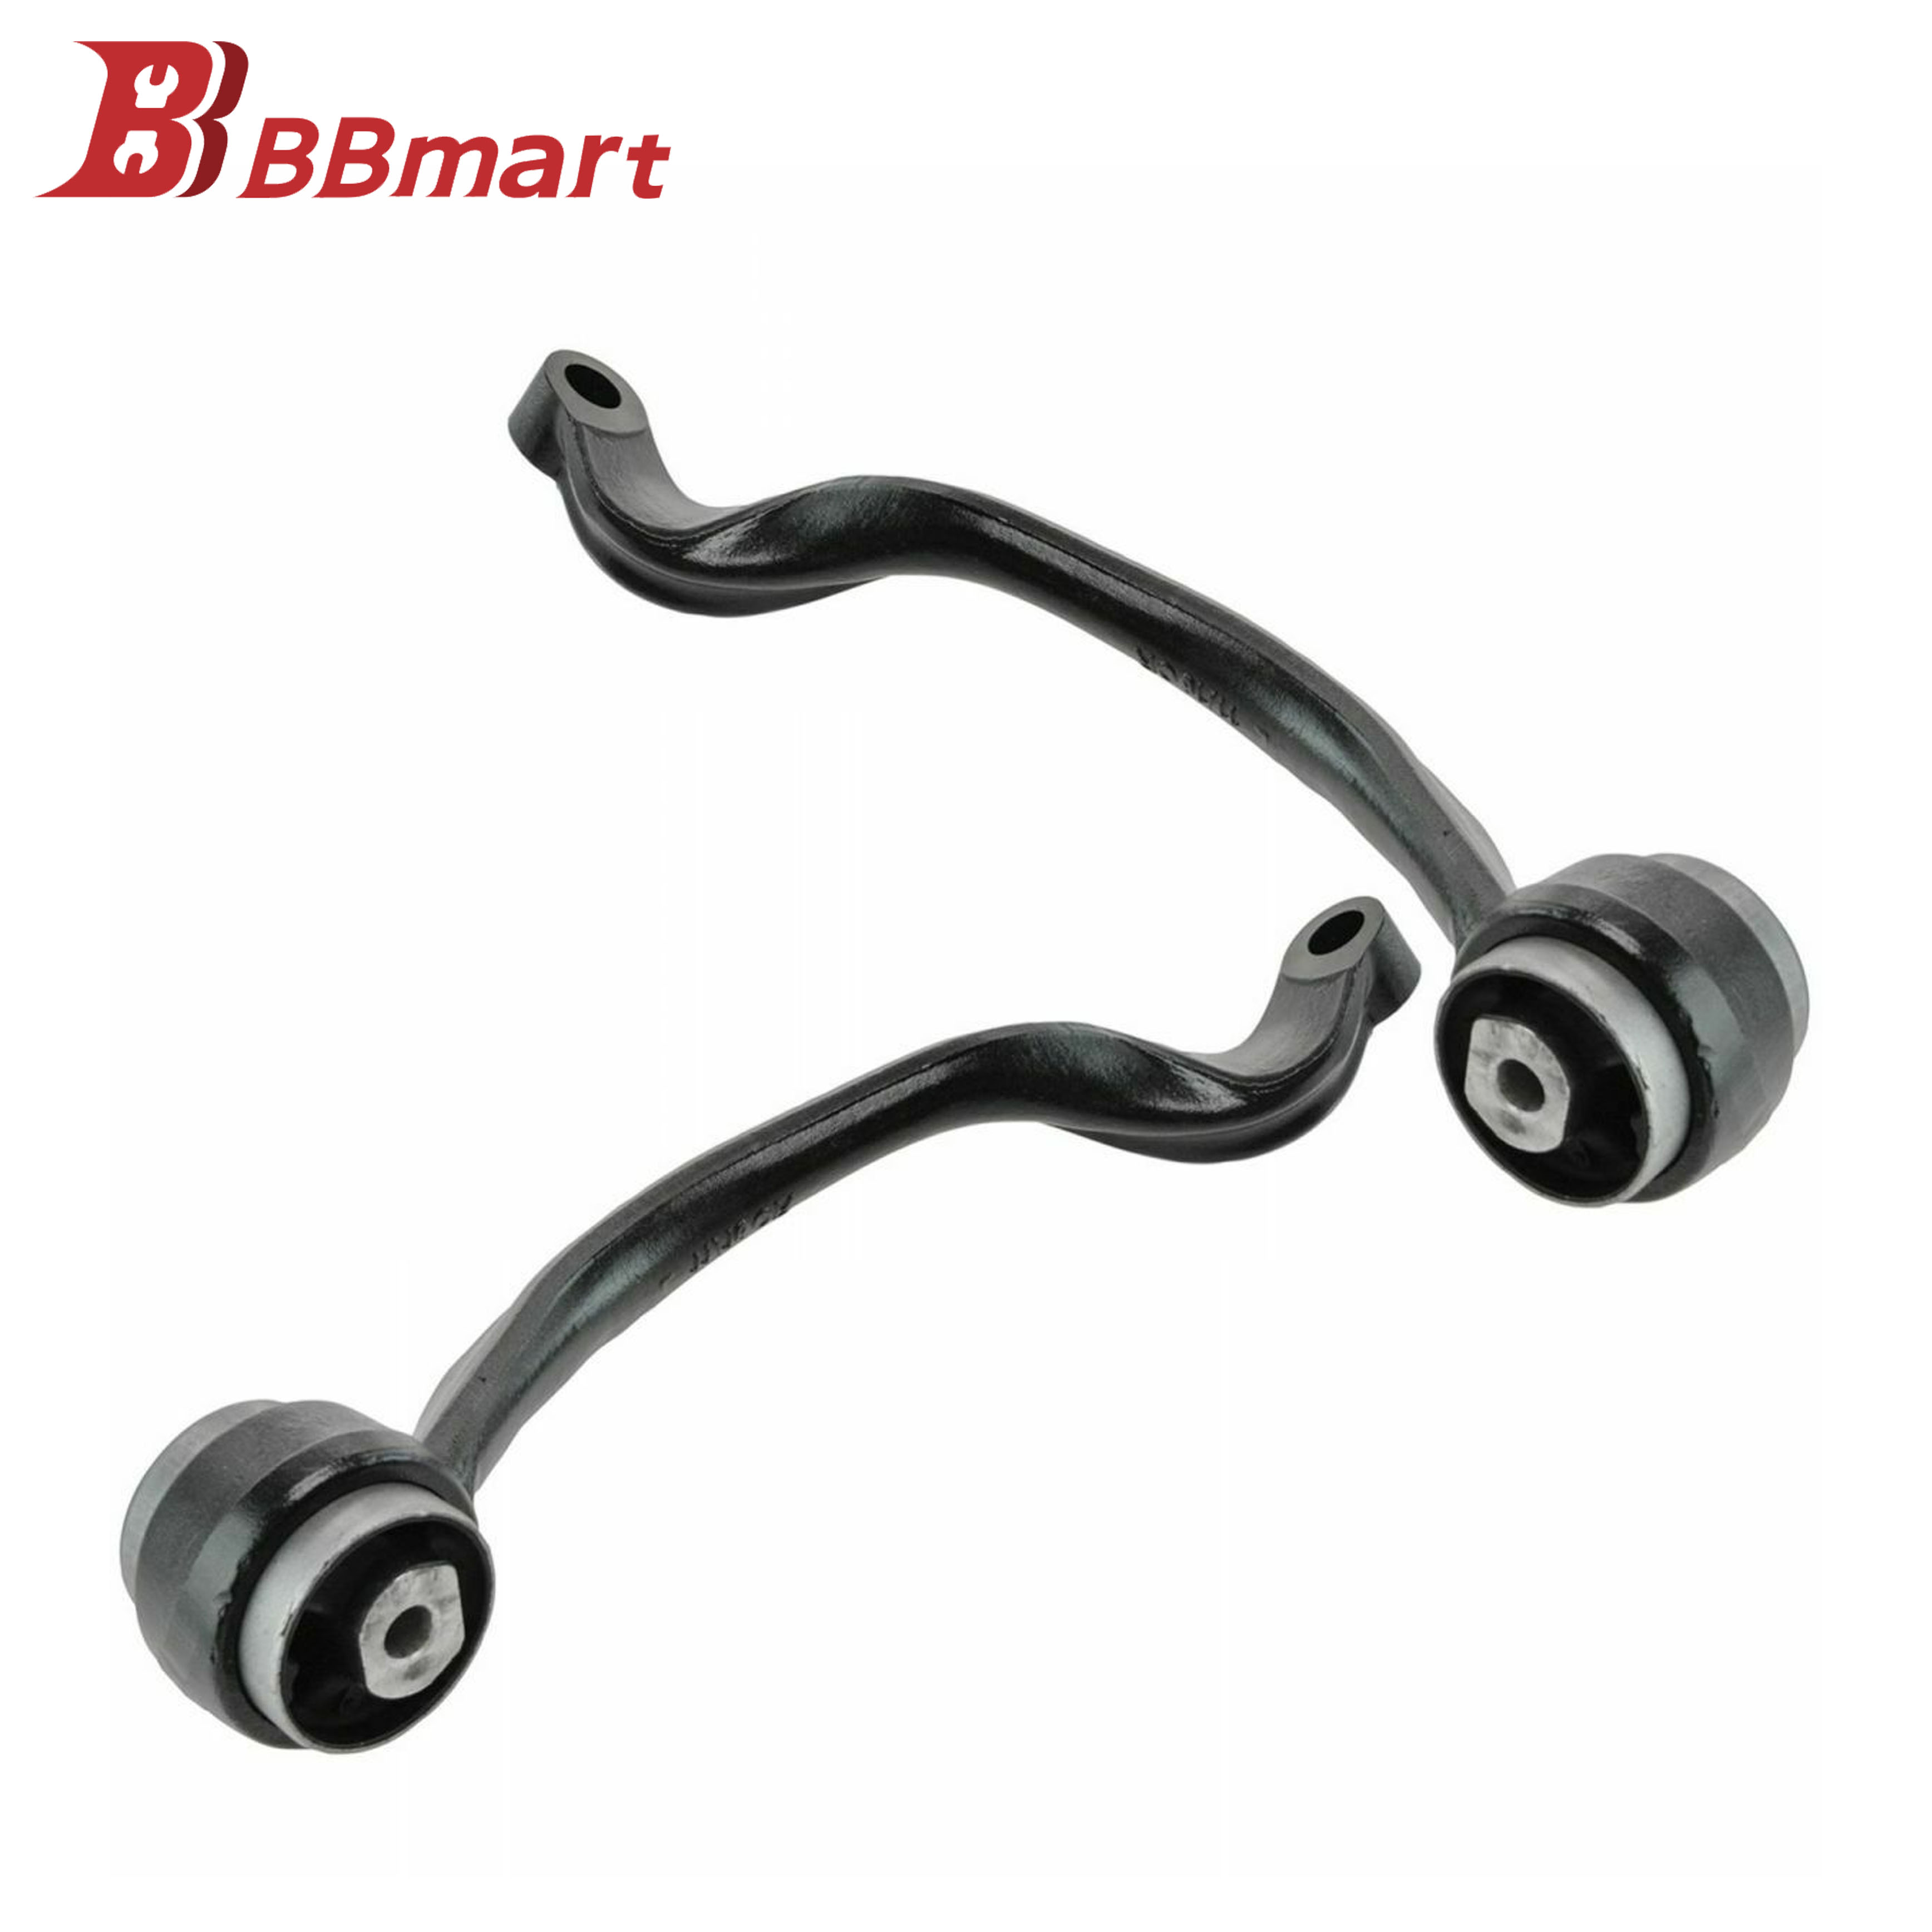 BBmart OEM Auto Parts Front Upper Left Control Arm For Land Rover RANGE ROVER 2002-2012 OE LR018344